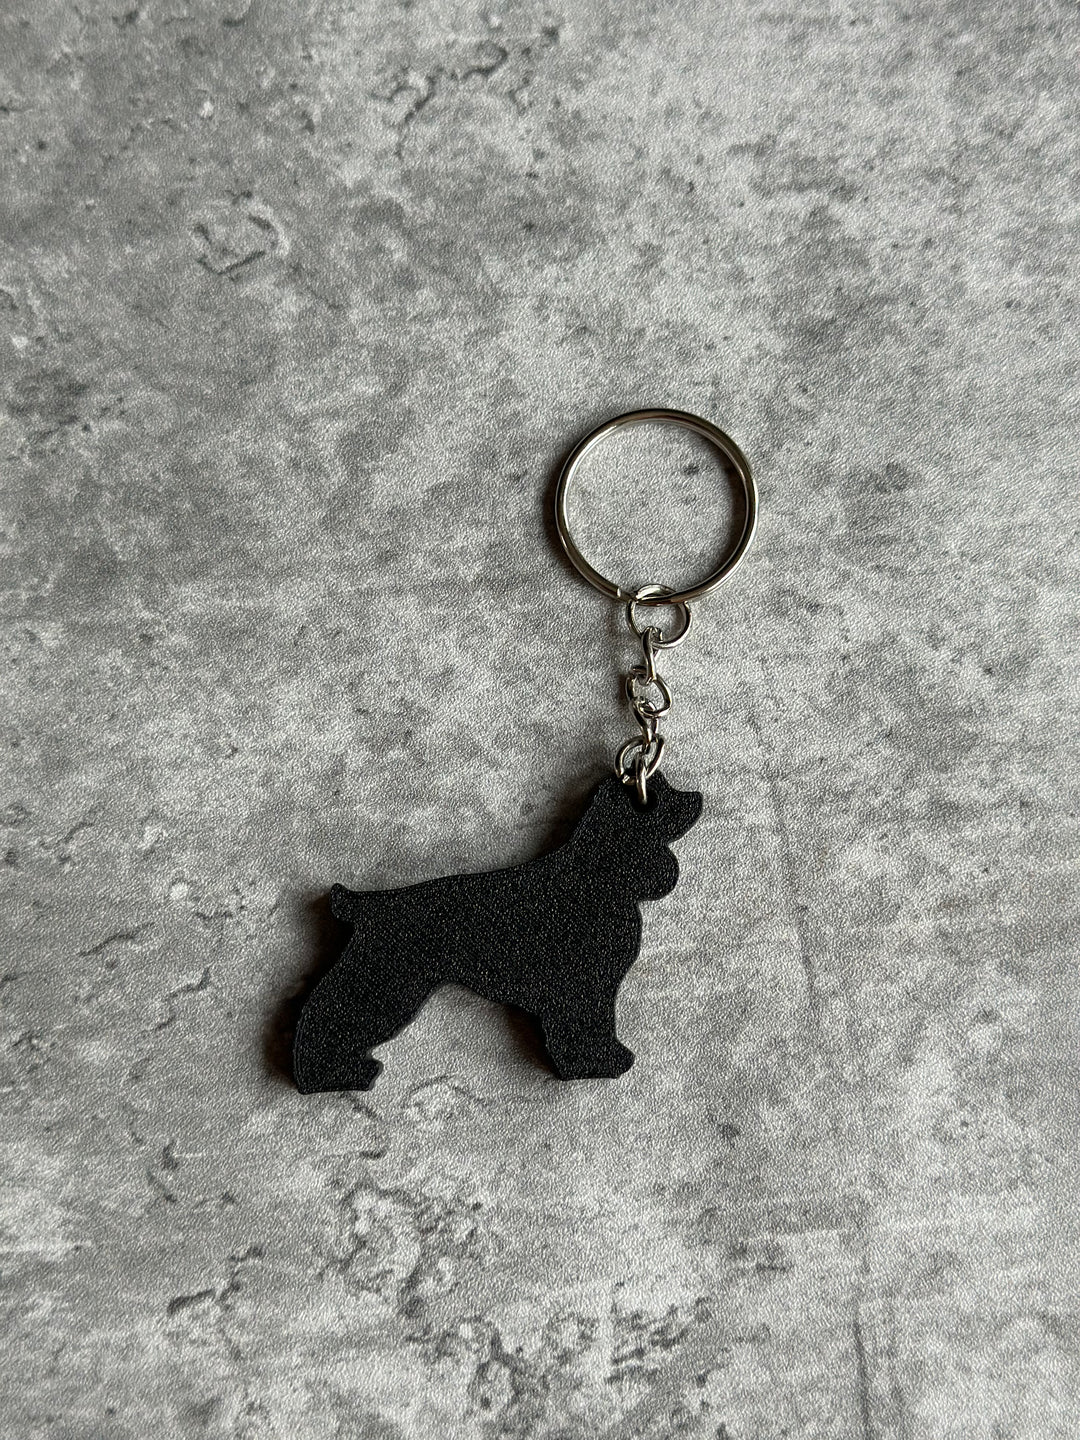 Cocker Spaniel Dog Keyring Stl File | 3D Printed | Unique Personalised Gifts